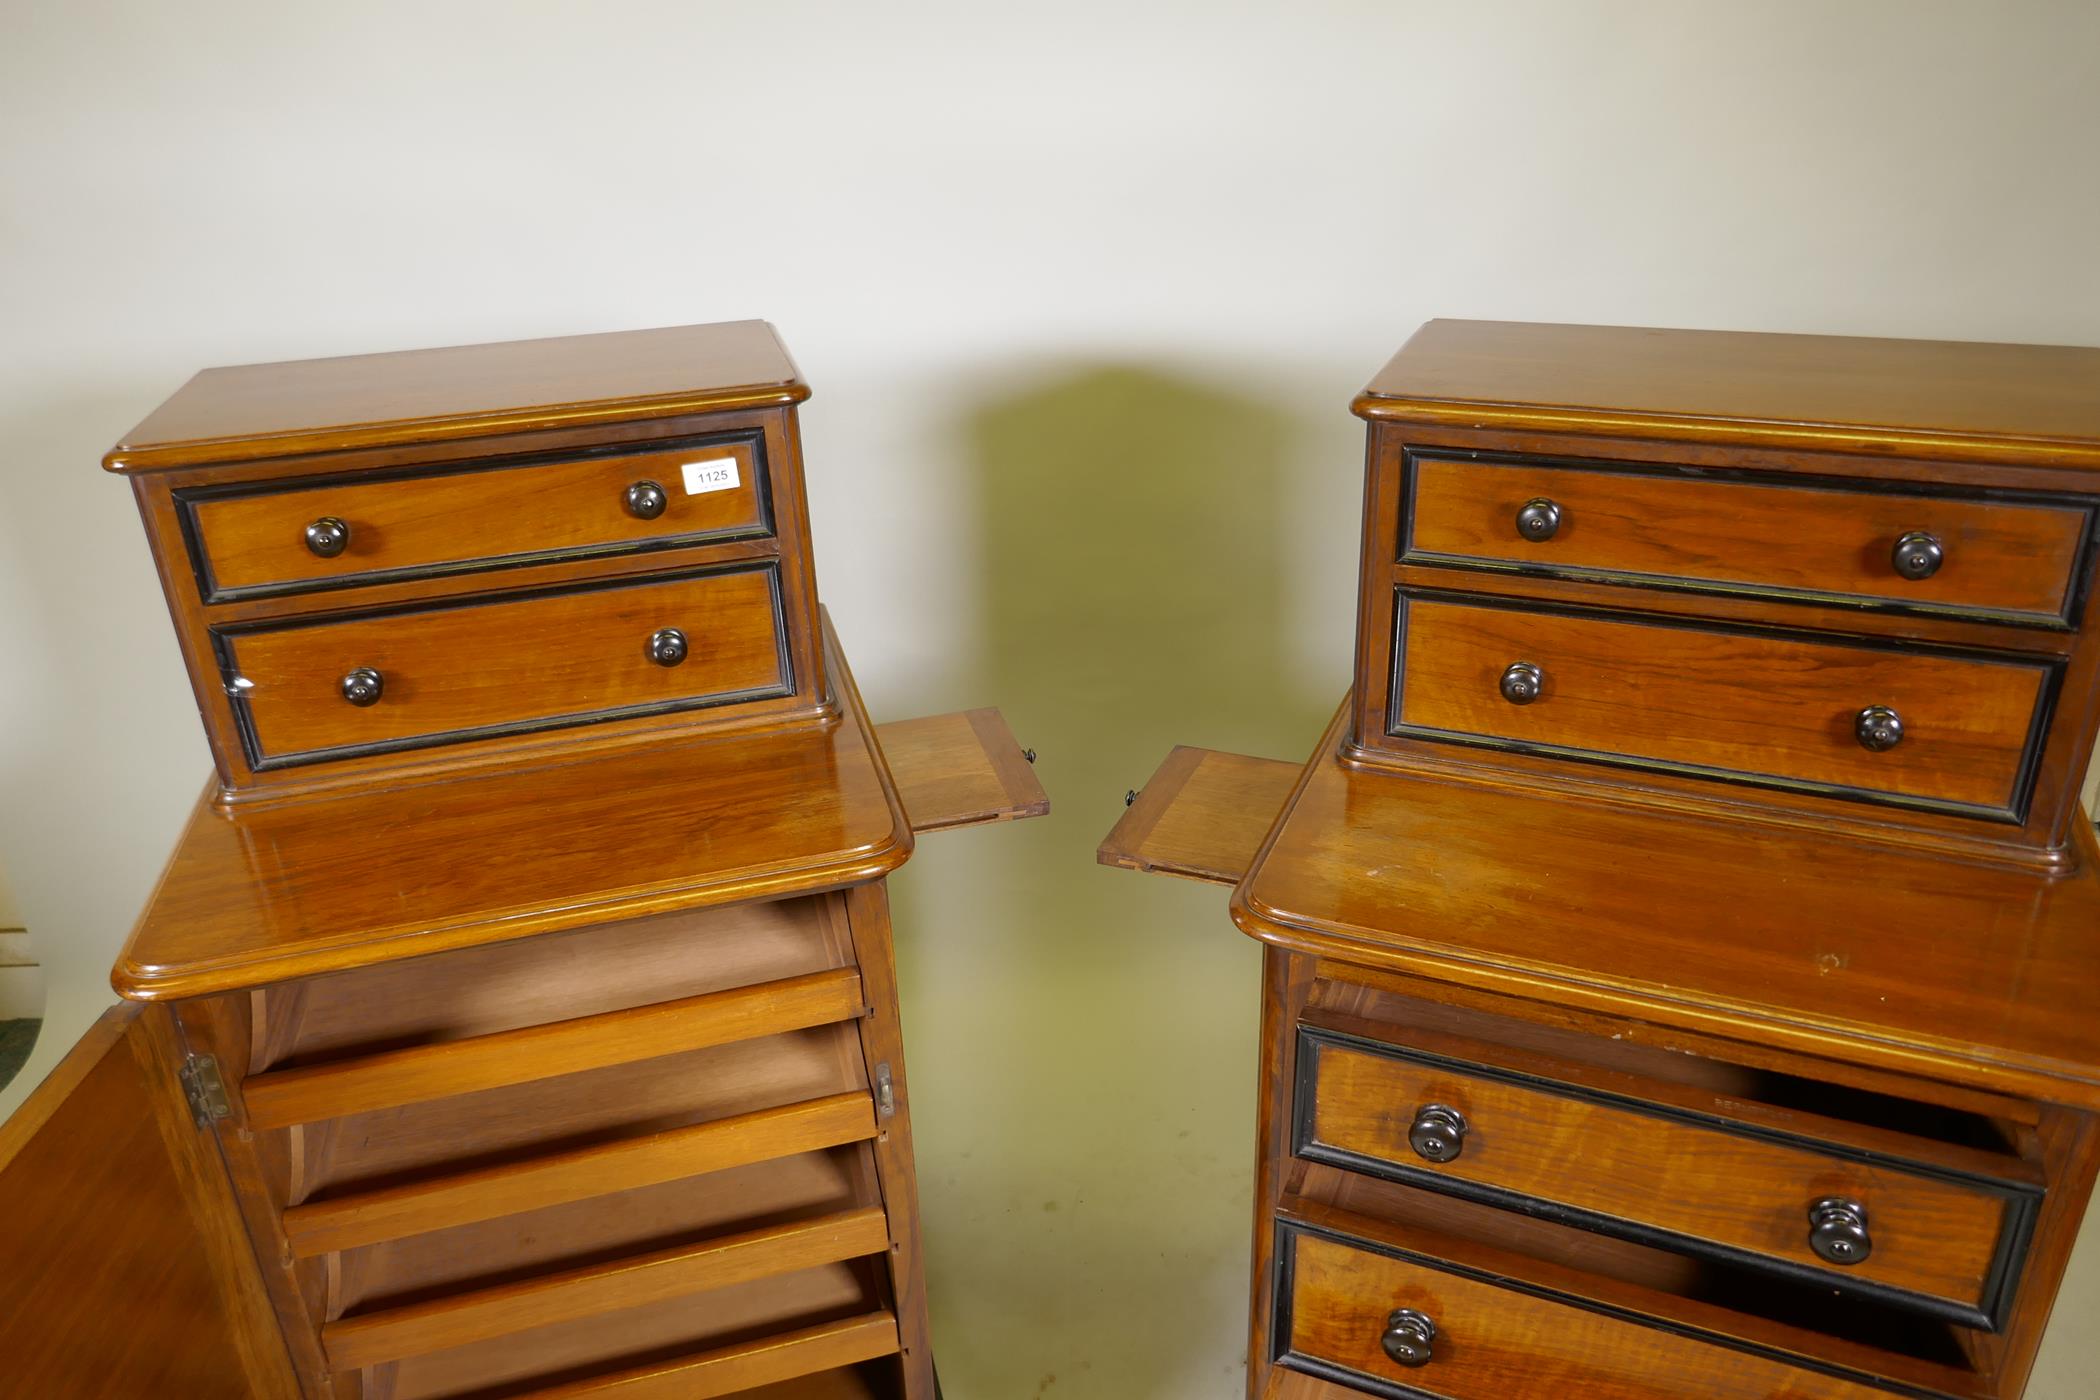 A pair of C19th walnut cabinets with ebony mouldings, one with six drawers, the other two drawers - Image 3 of 8